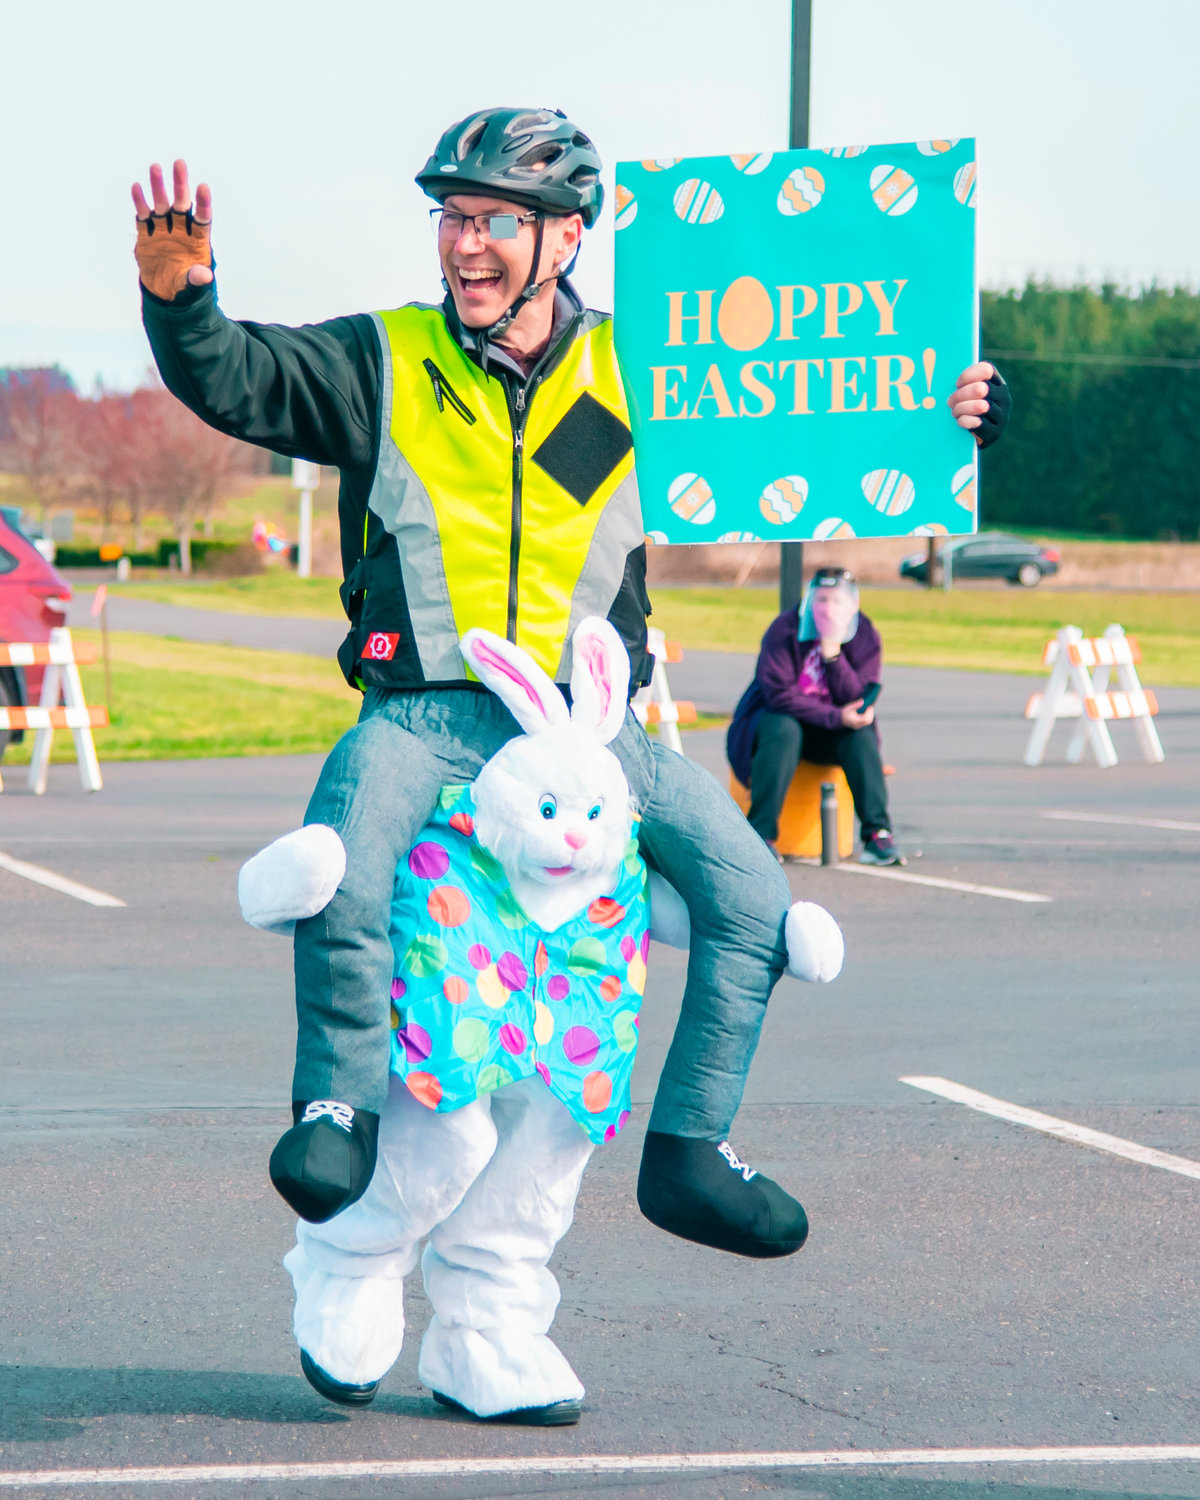 Pastor Kyle Rasmussen smiles and waves to visitors during an Easter event at Bethel Church in Chehalis on Saturday.